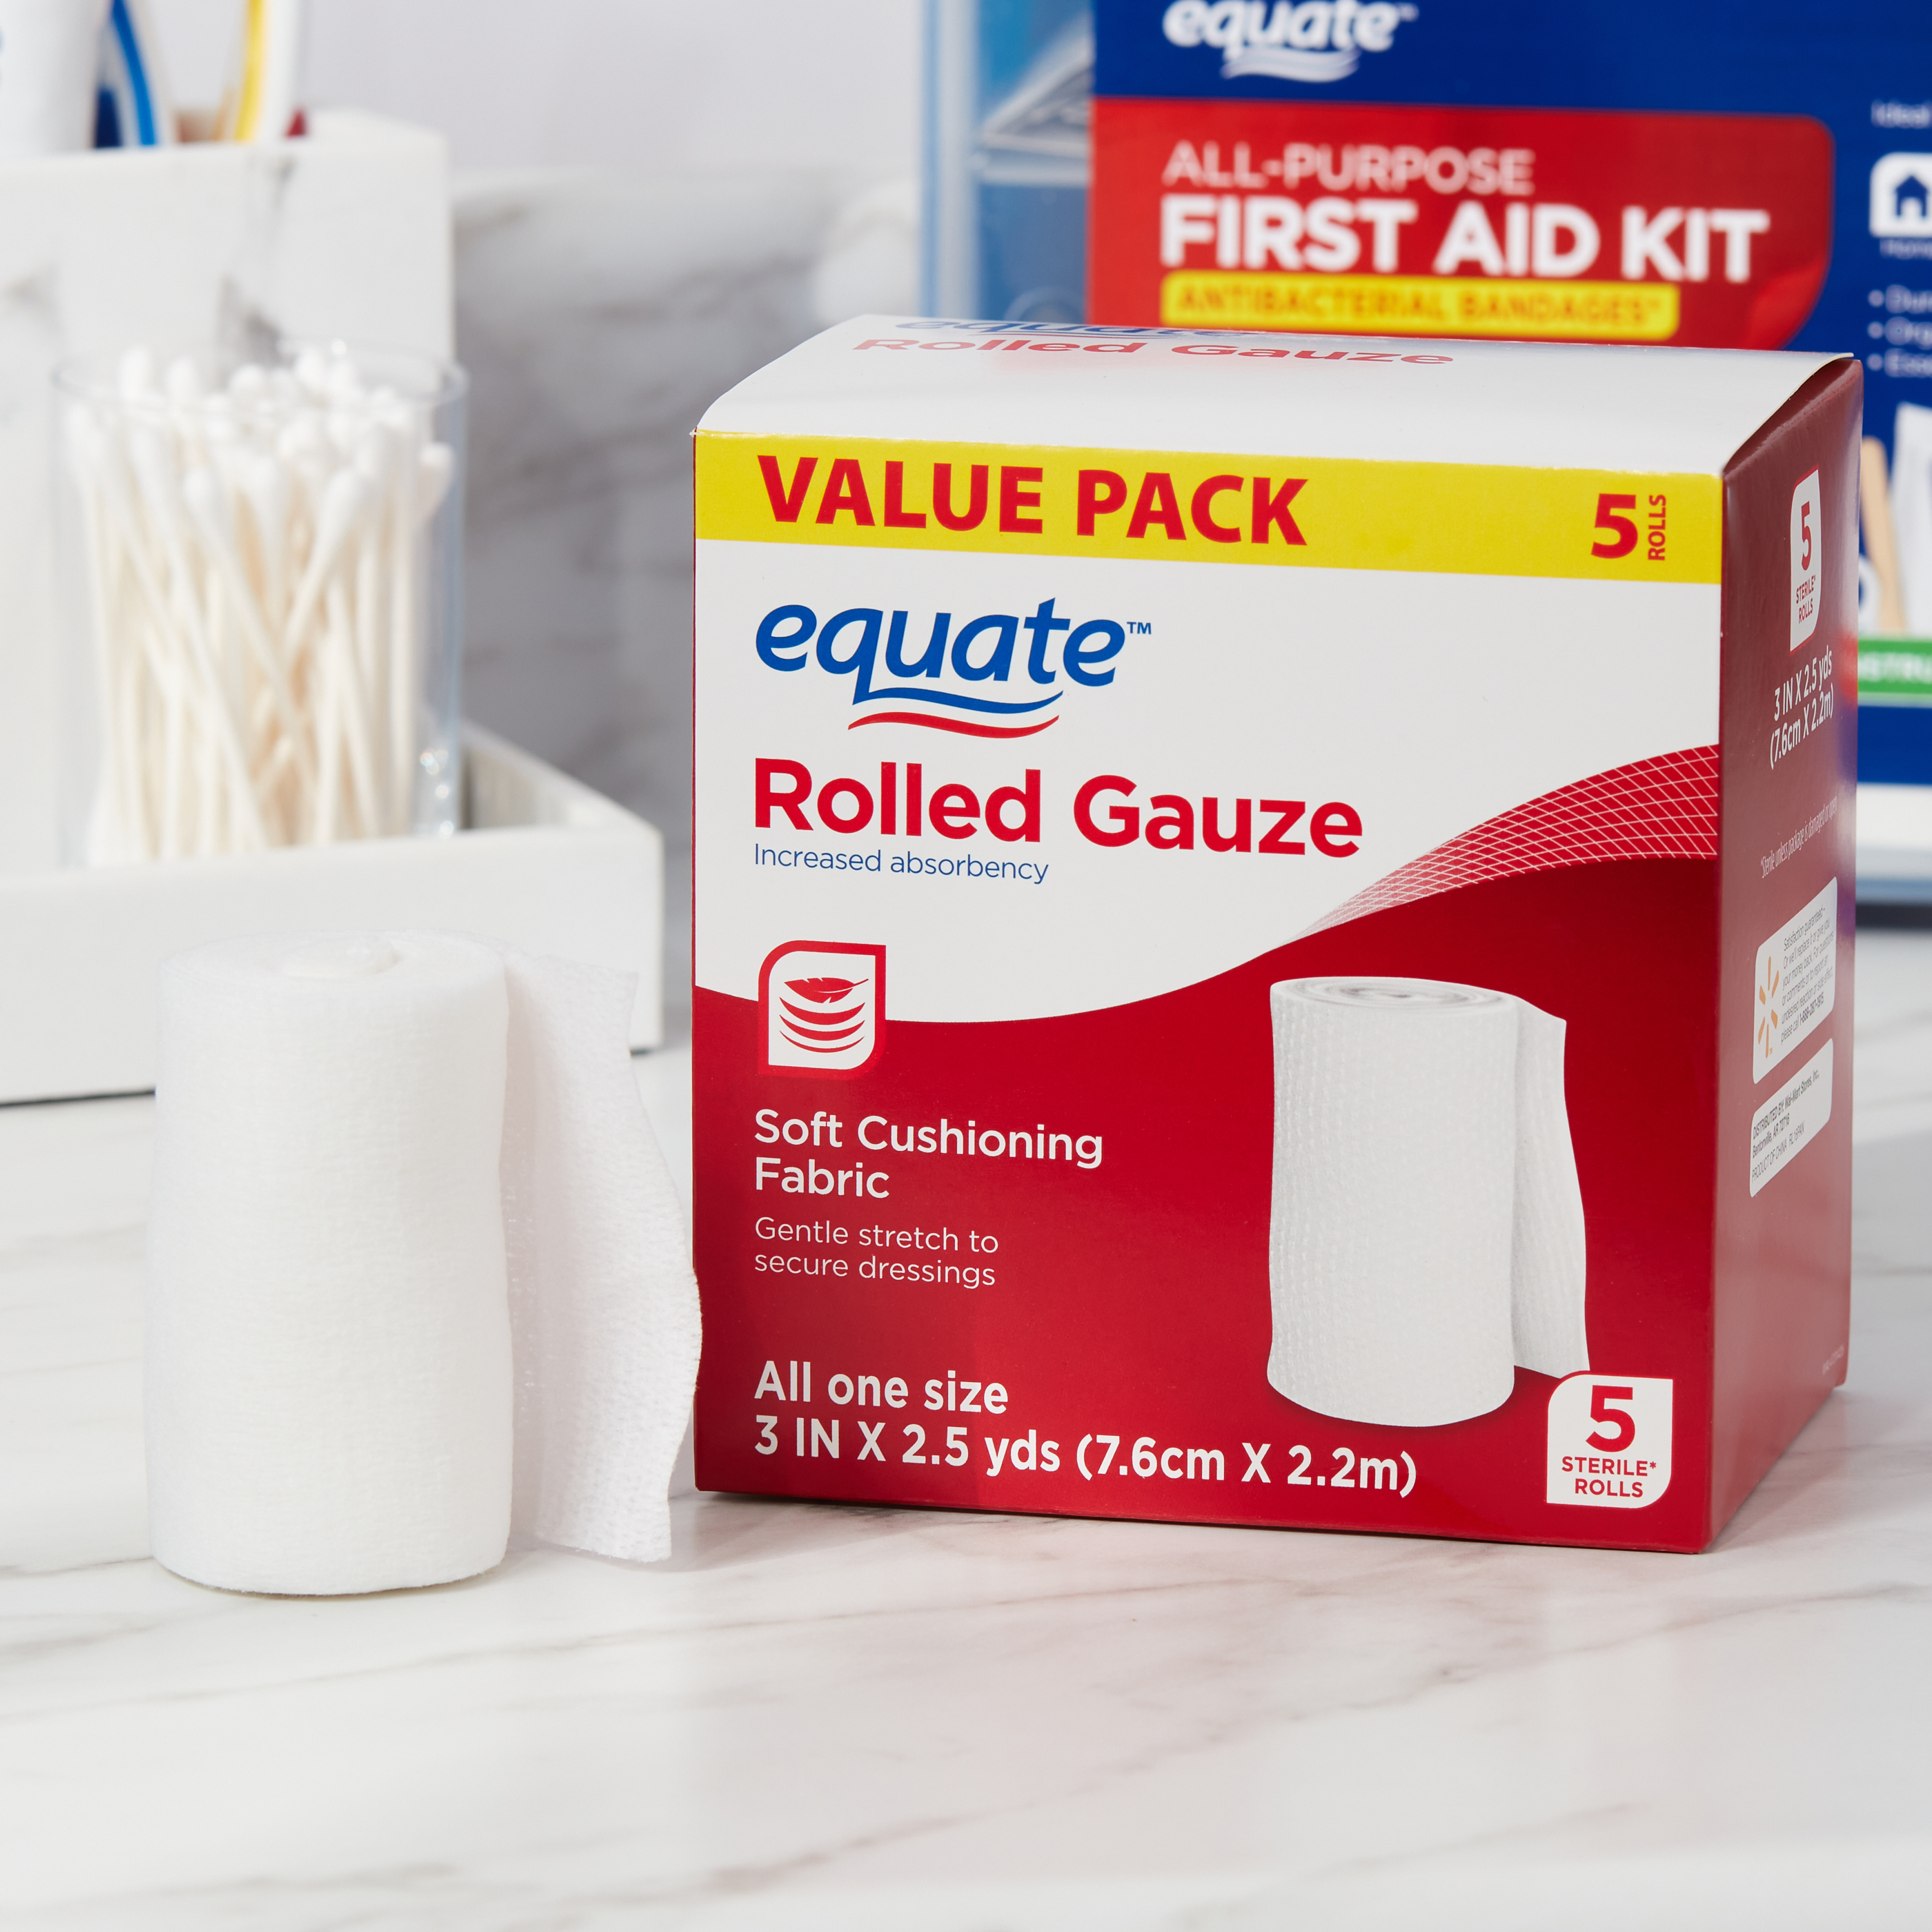 Equate Rolled Gauze, 3" x 2.5 yd, 5 Count - image 2 of 8